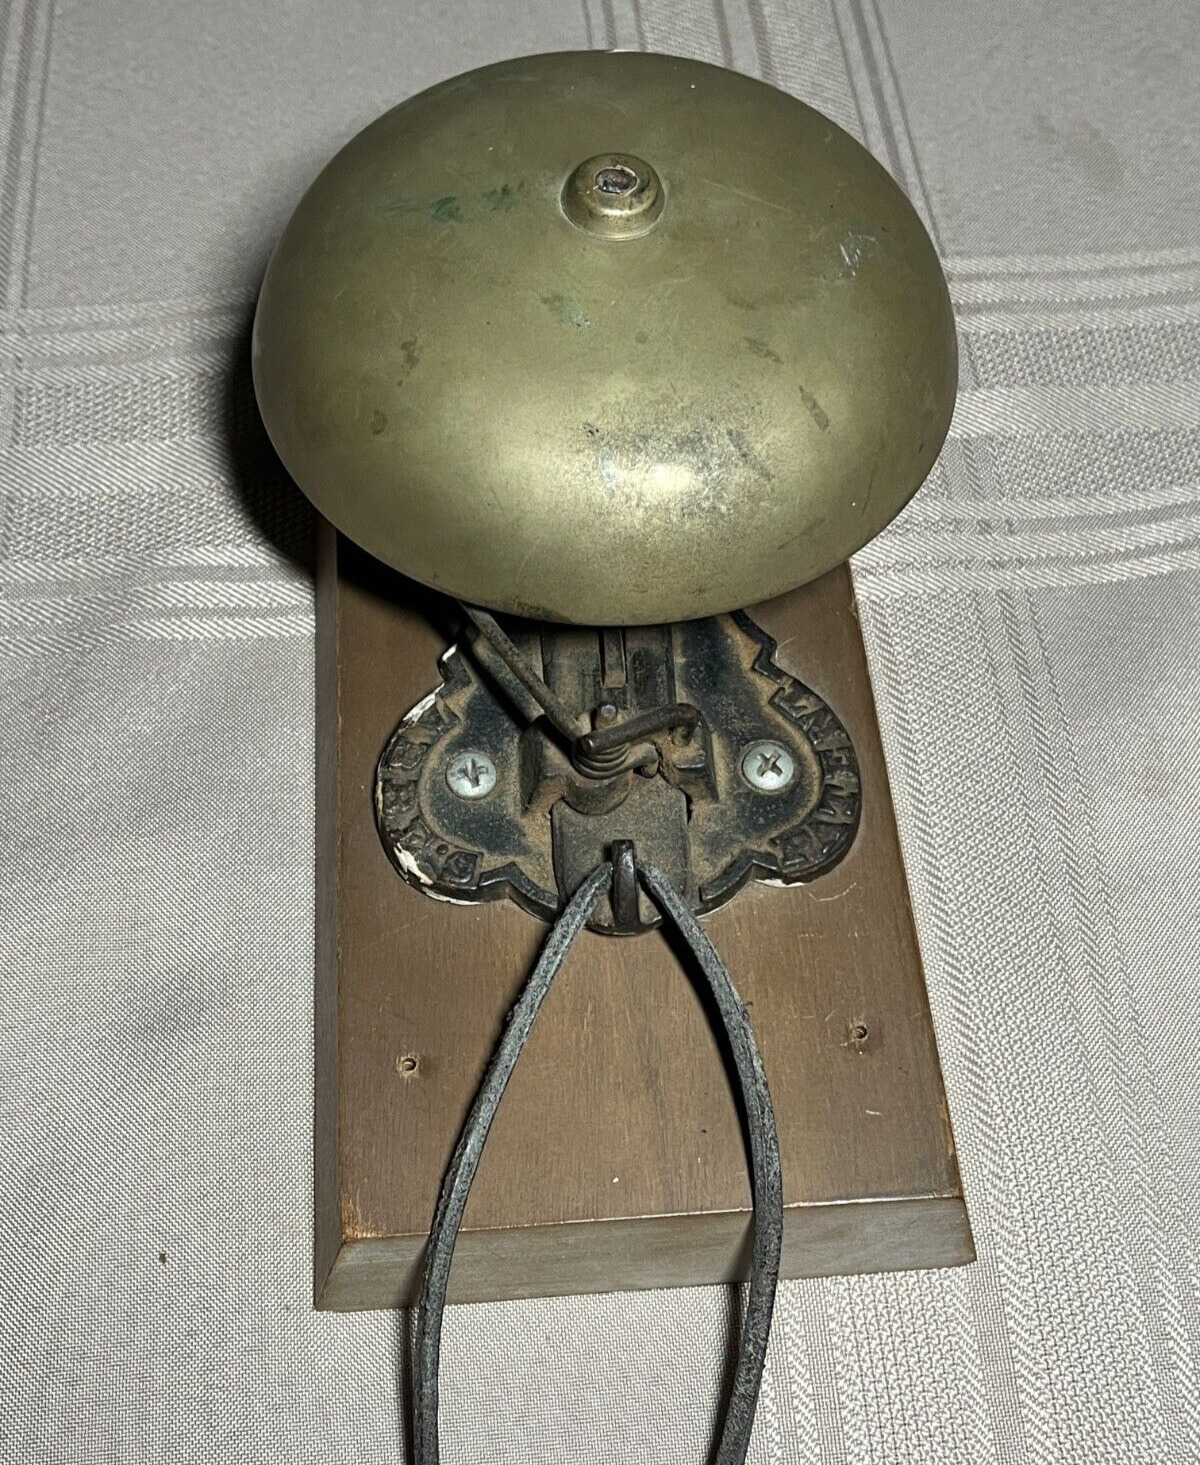 Vintage ABBE\'S Patent Boxing / Trolley Bell, Not currently ringing